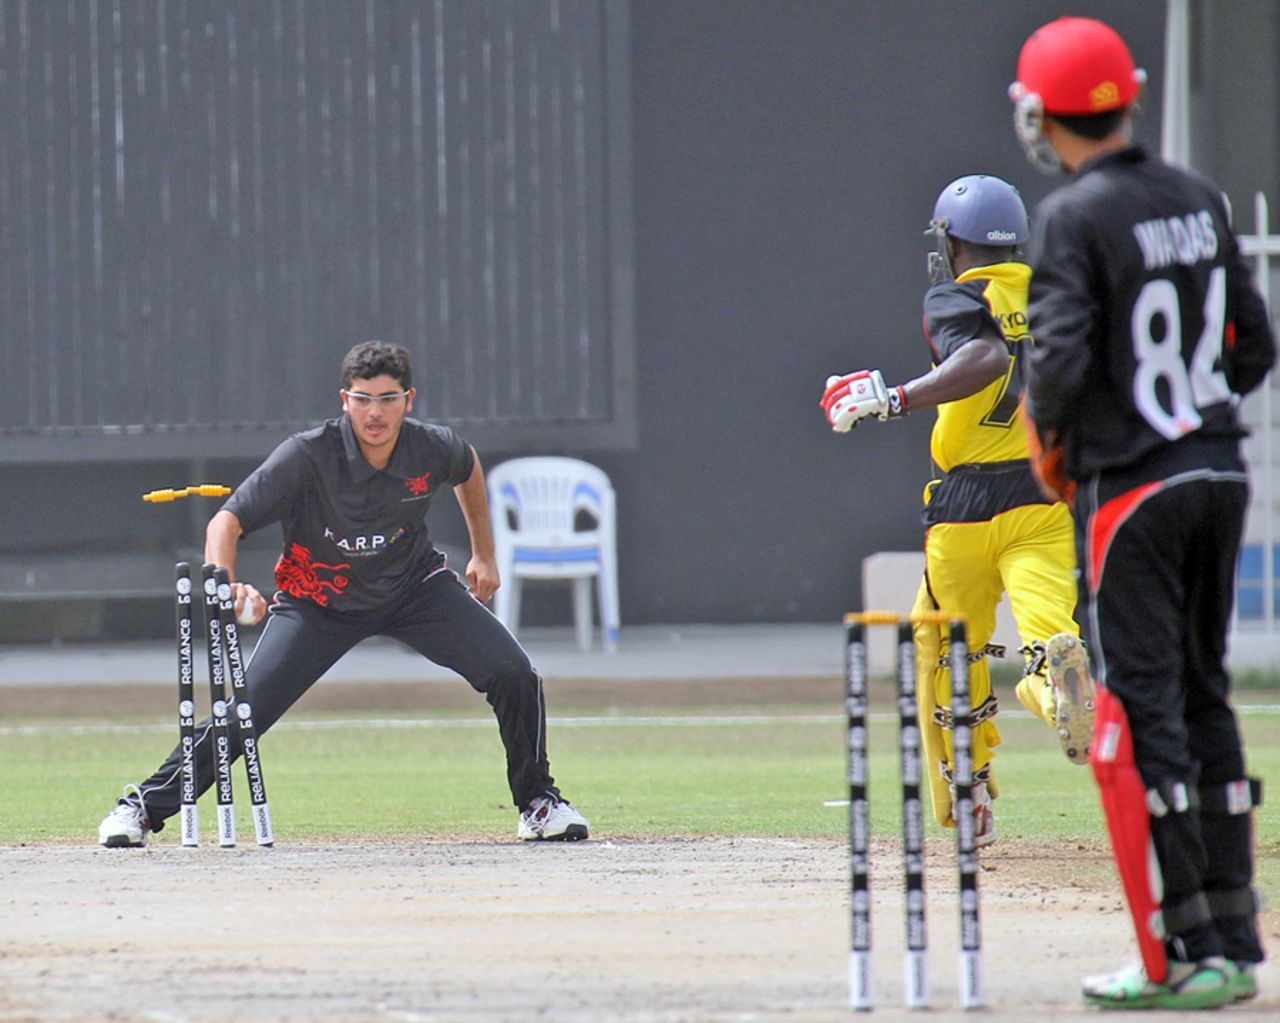 A smart piece of fielding by Kinchit Shah affects the run-out of Uganda's Arthur Kyobe during the 11th Place Play-off match at the ICC World Twenty20 Qualifier played at Sharjah Cricket Stadium on 22nd March 2012